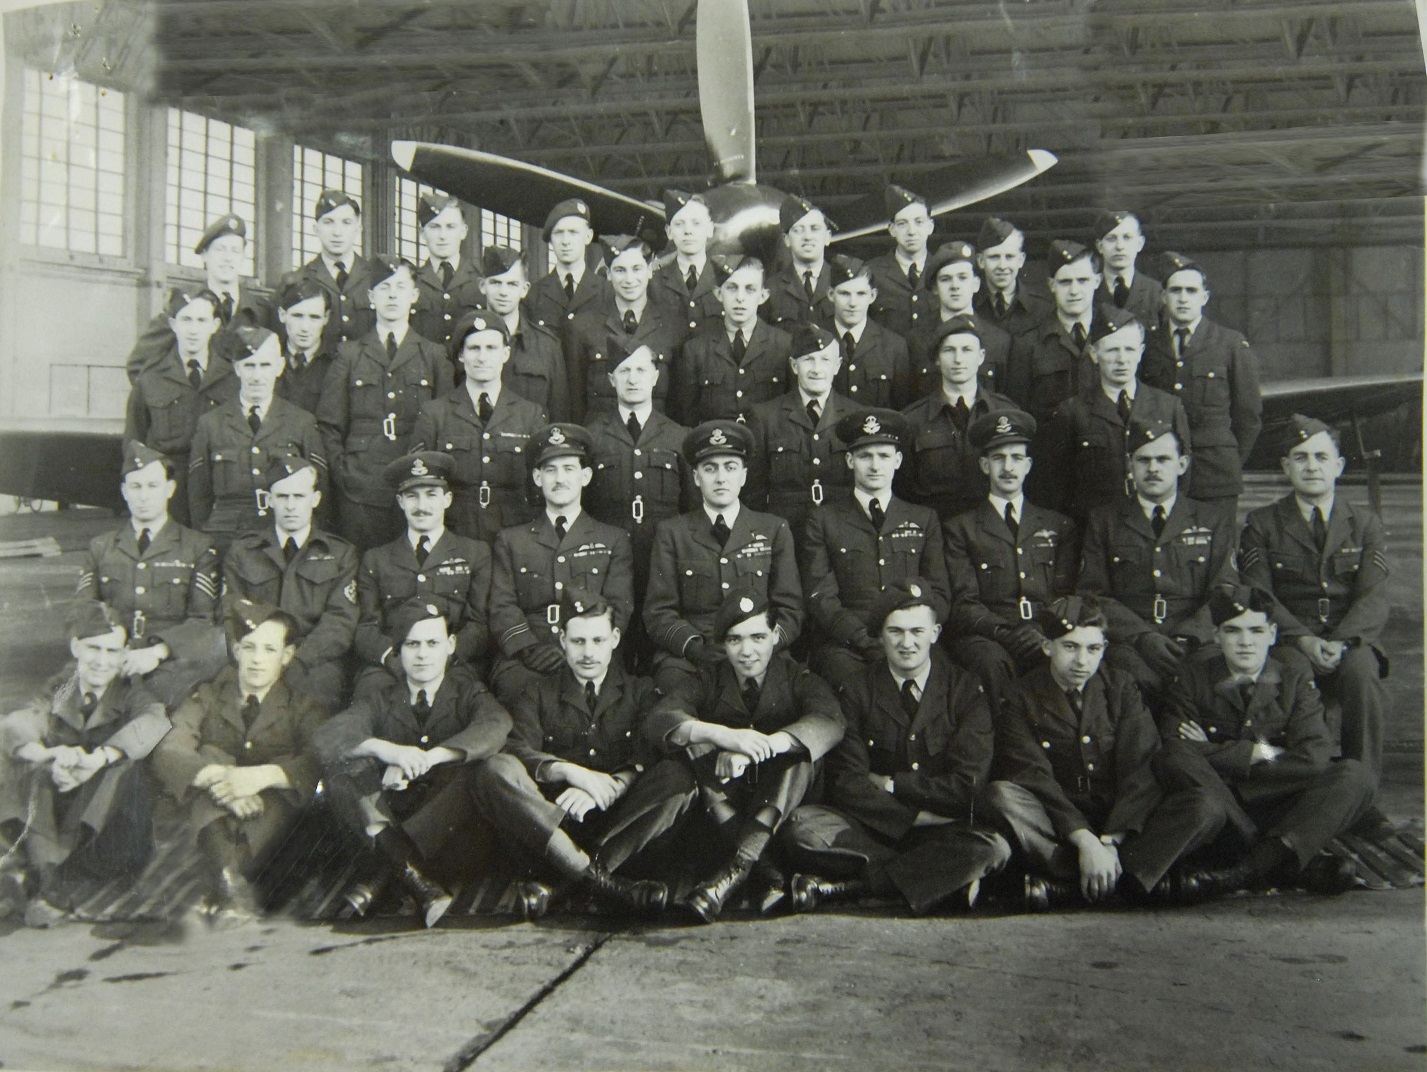 Personnel (possibly one flight) of No 541 Squadron